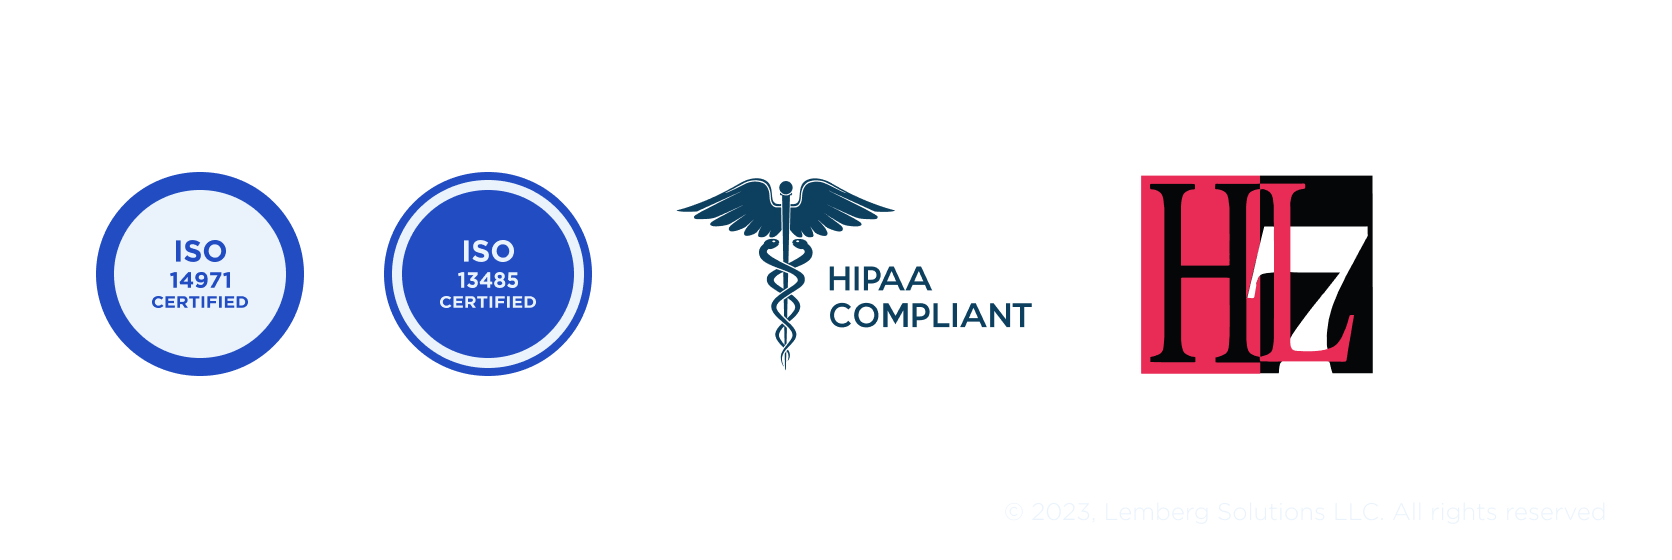 Healthcare industry compliance - Lemberg Solutions